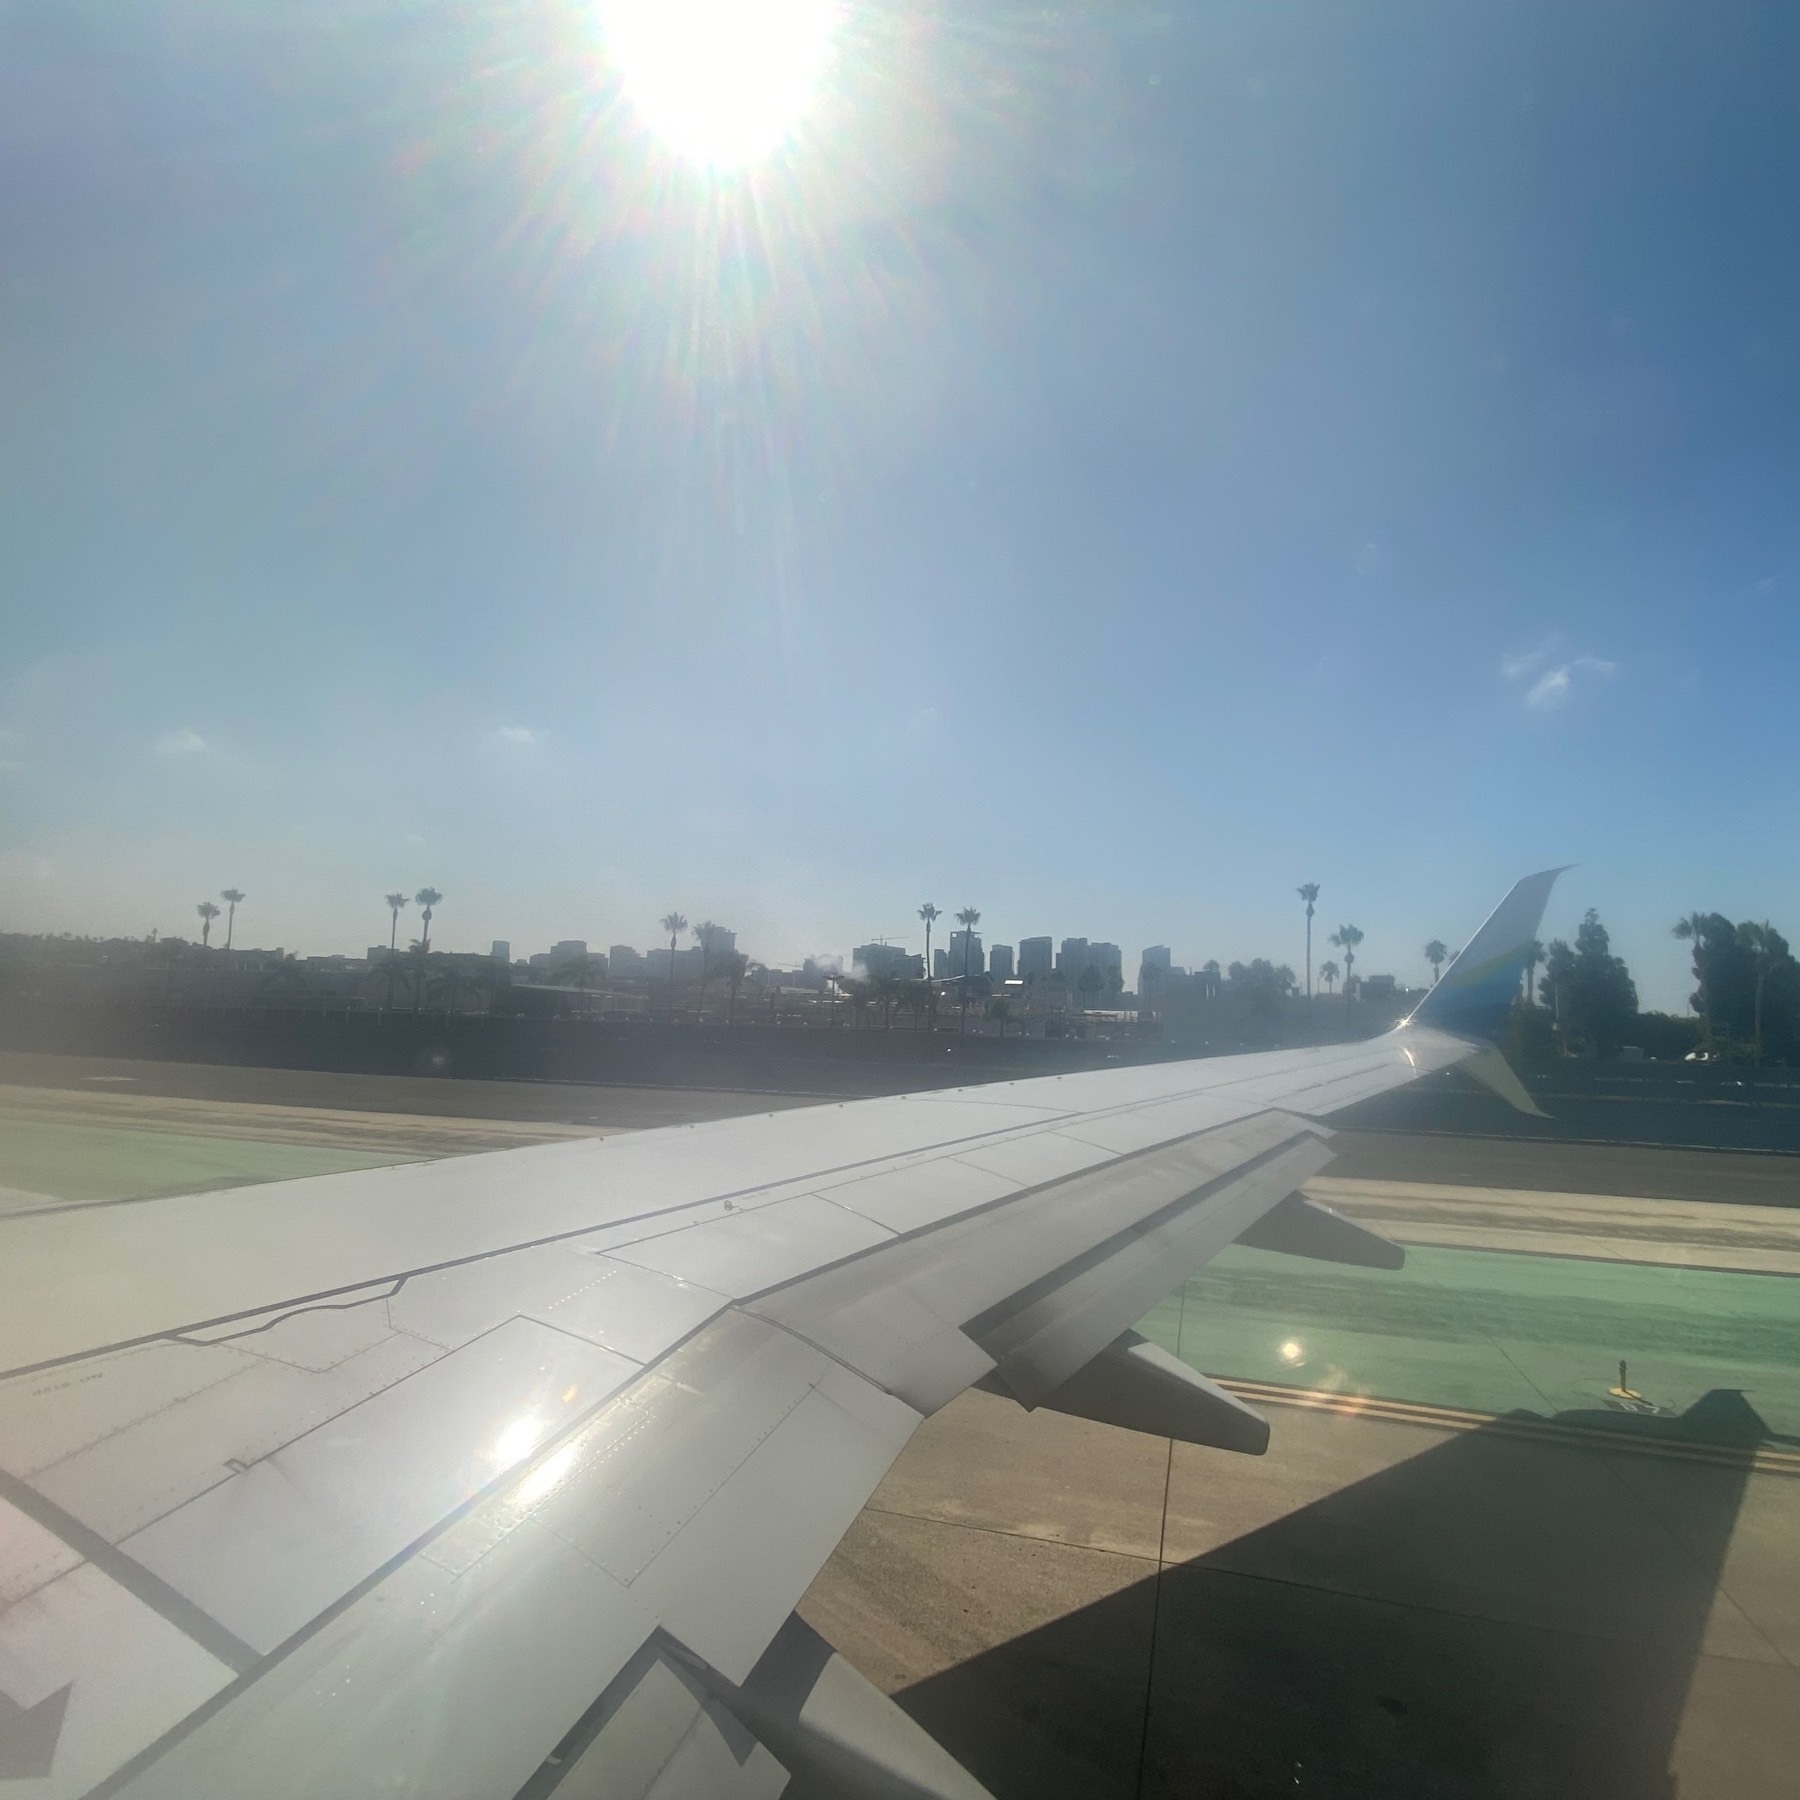 View out an airplane window on the taxiway with the bright sun above reflected off the wing below.